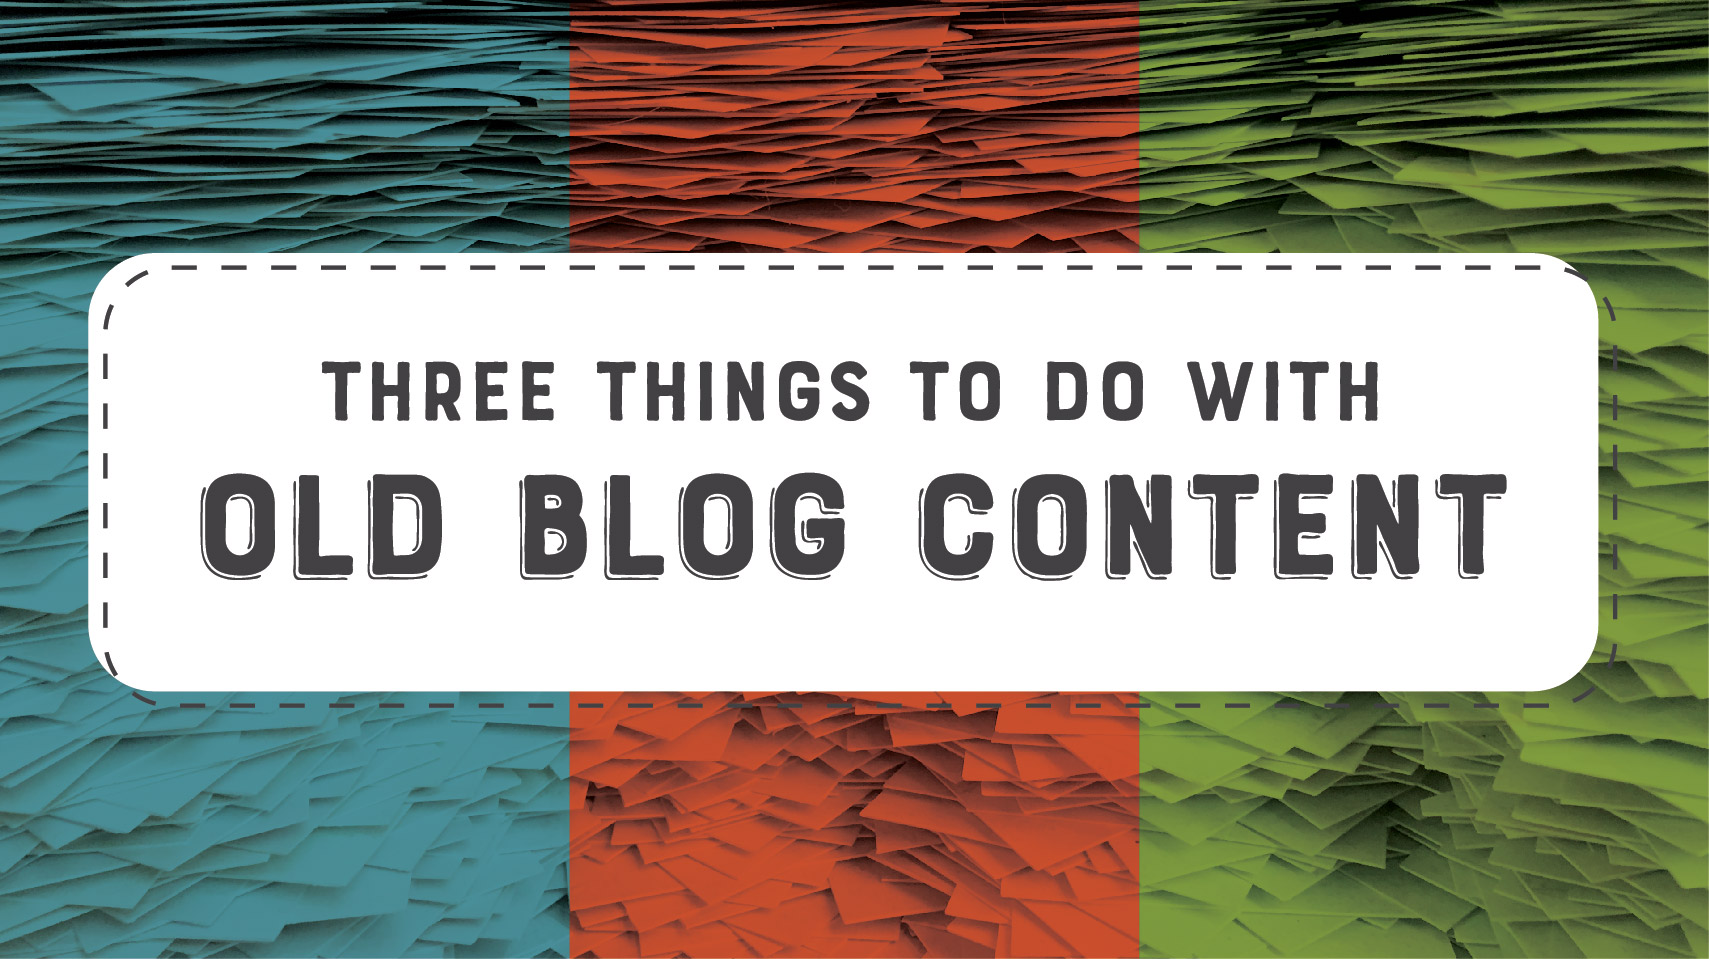 What to do with old blog content